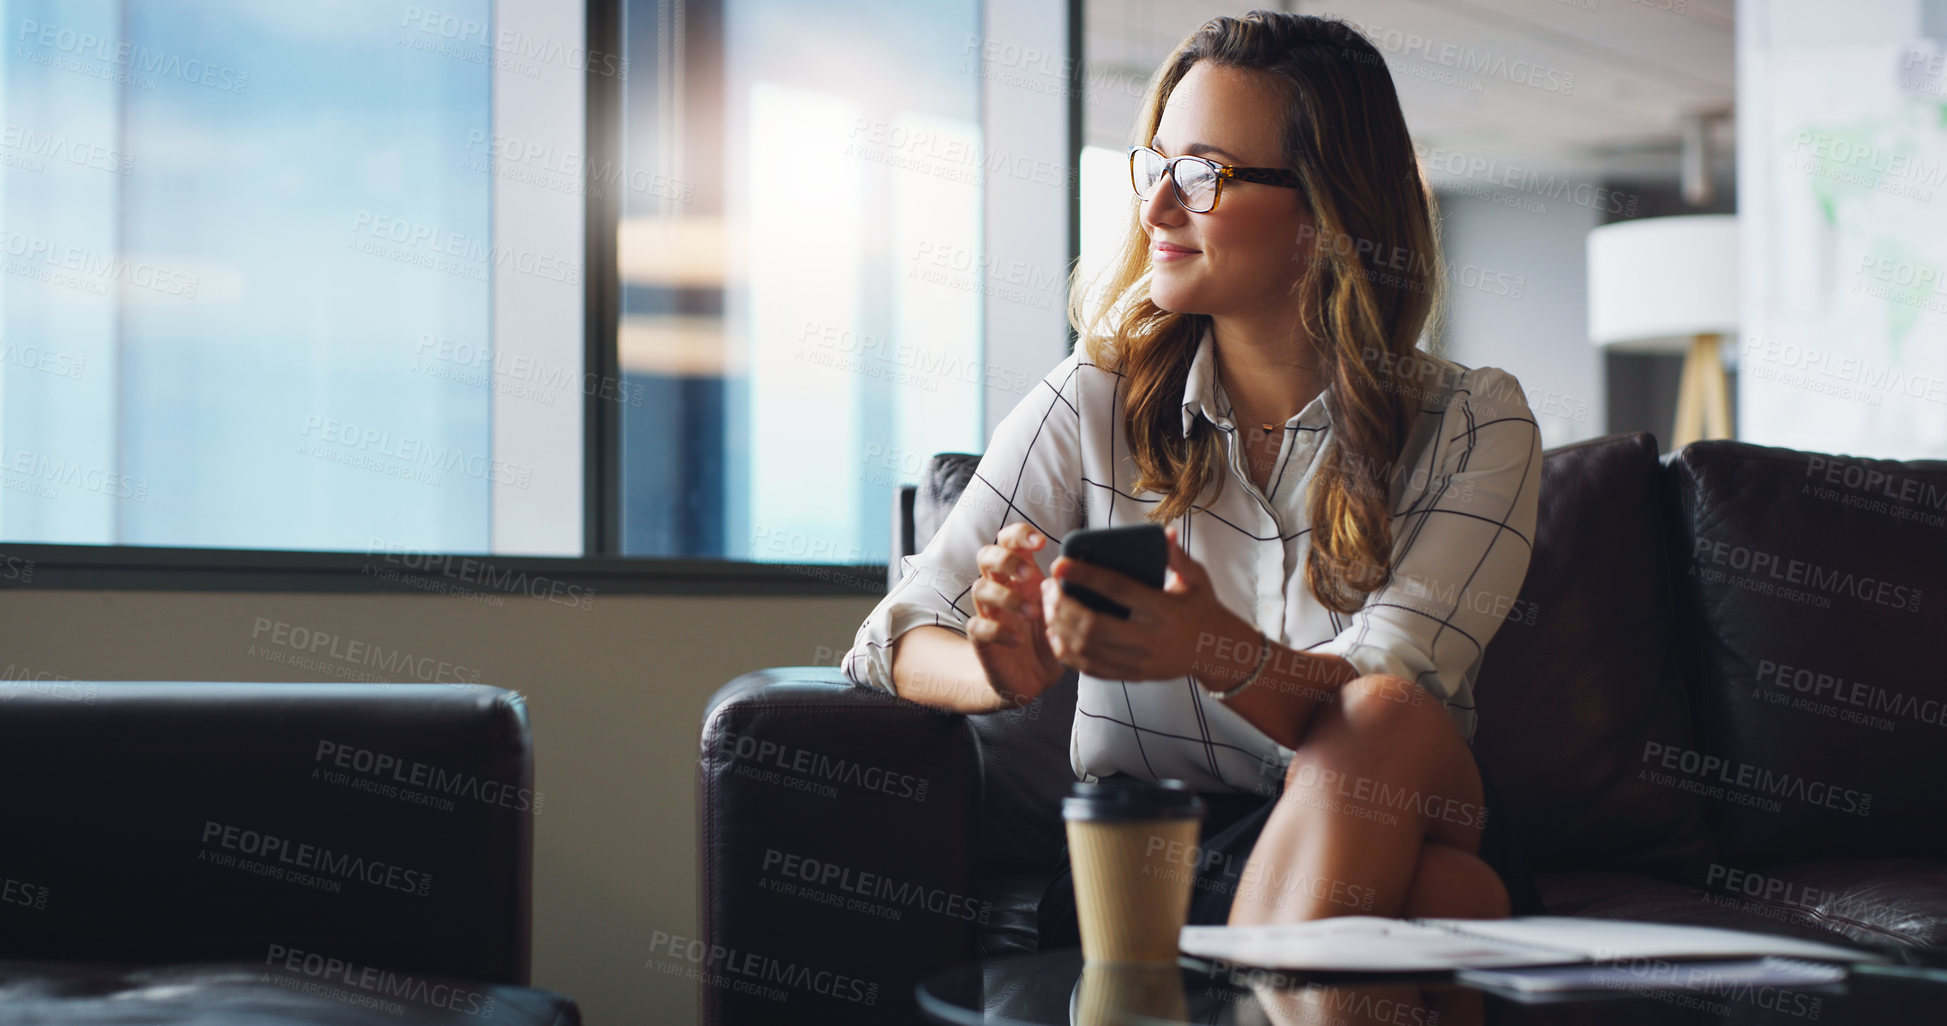 Buy stock photo Cropped shot of a businesswoman looking thoughtful while sitting in a modern office